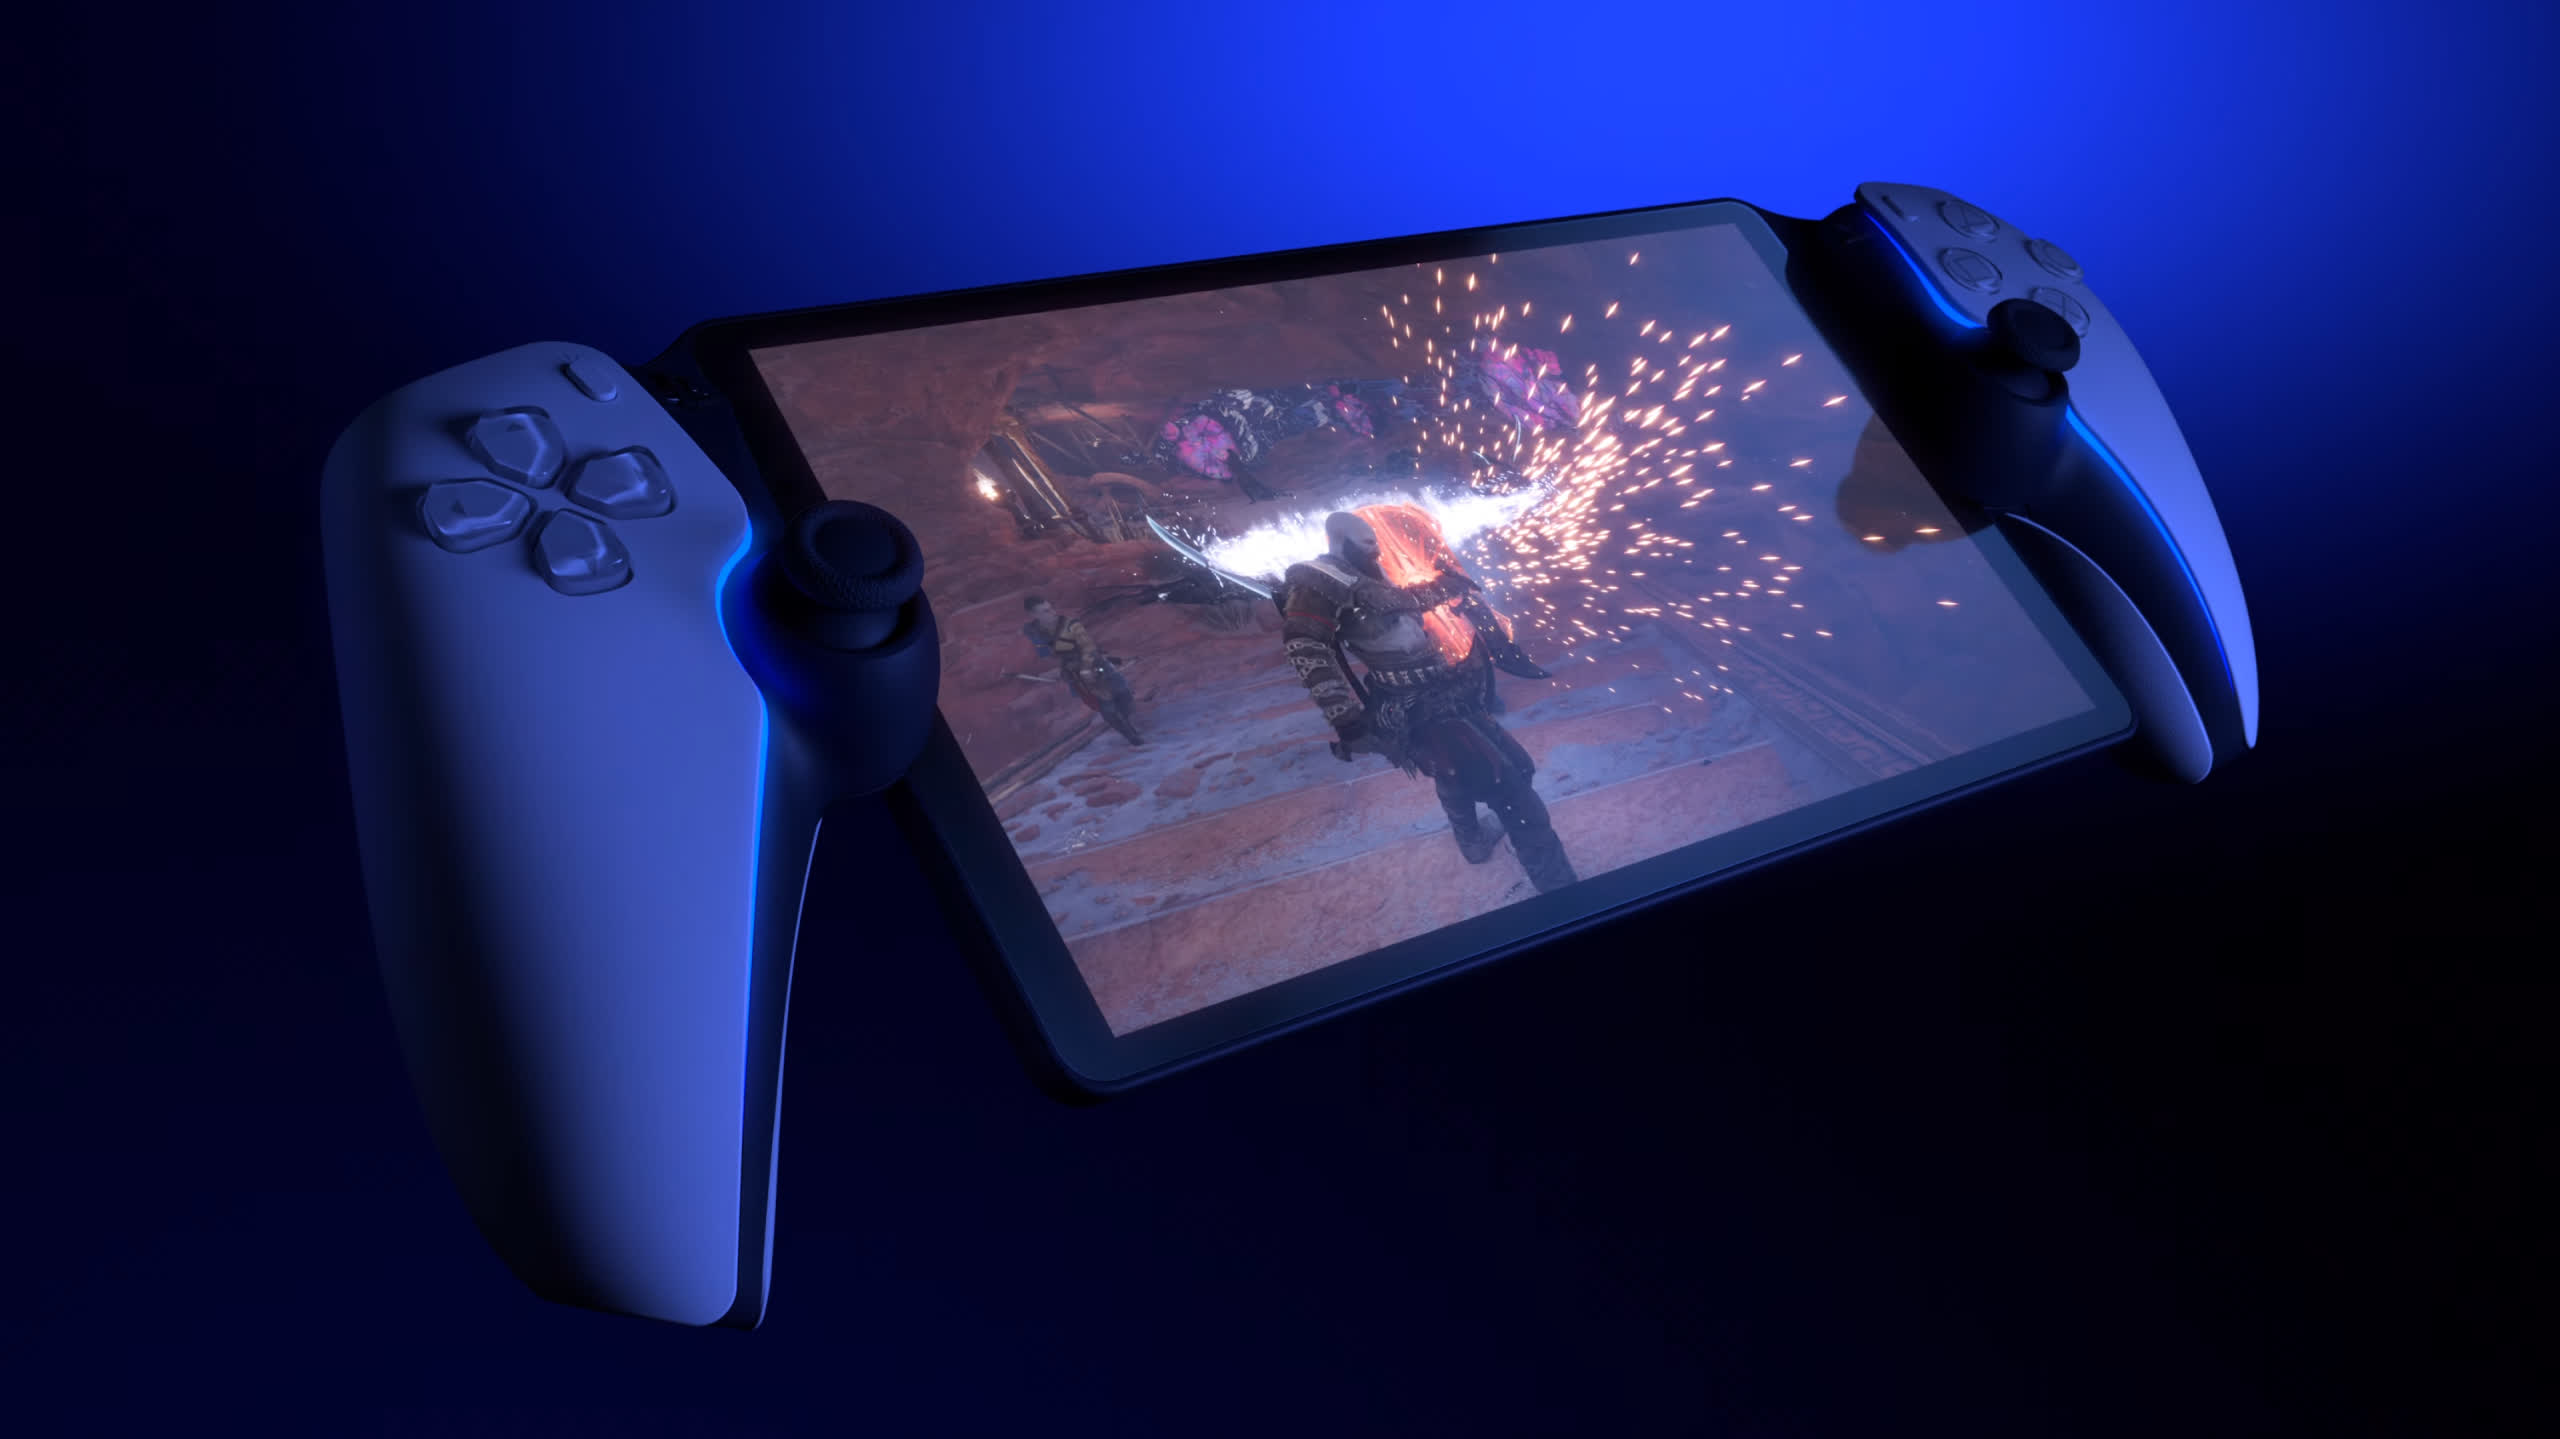 Sony reveals Project Q handheld designed for streaming PS5 games over Wi-Fi